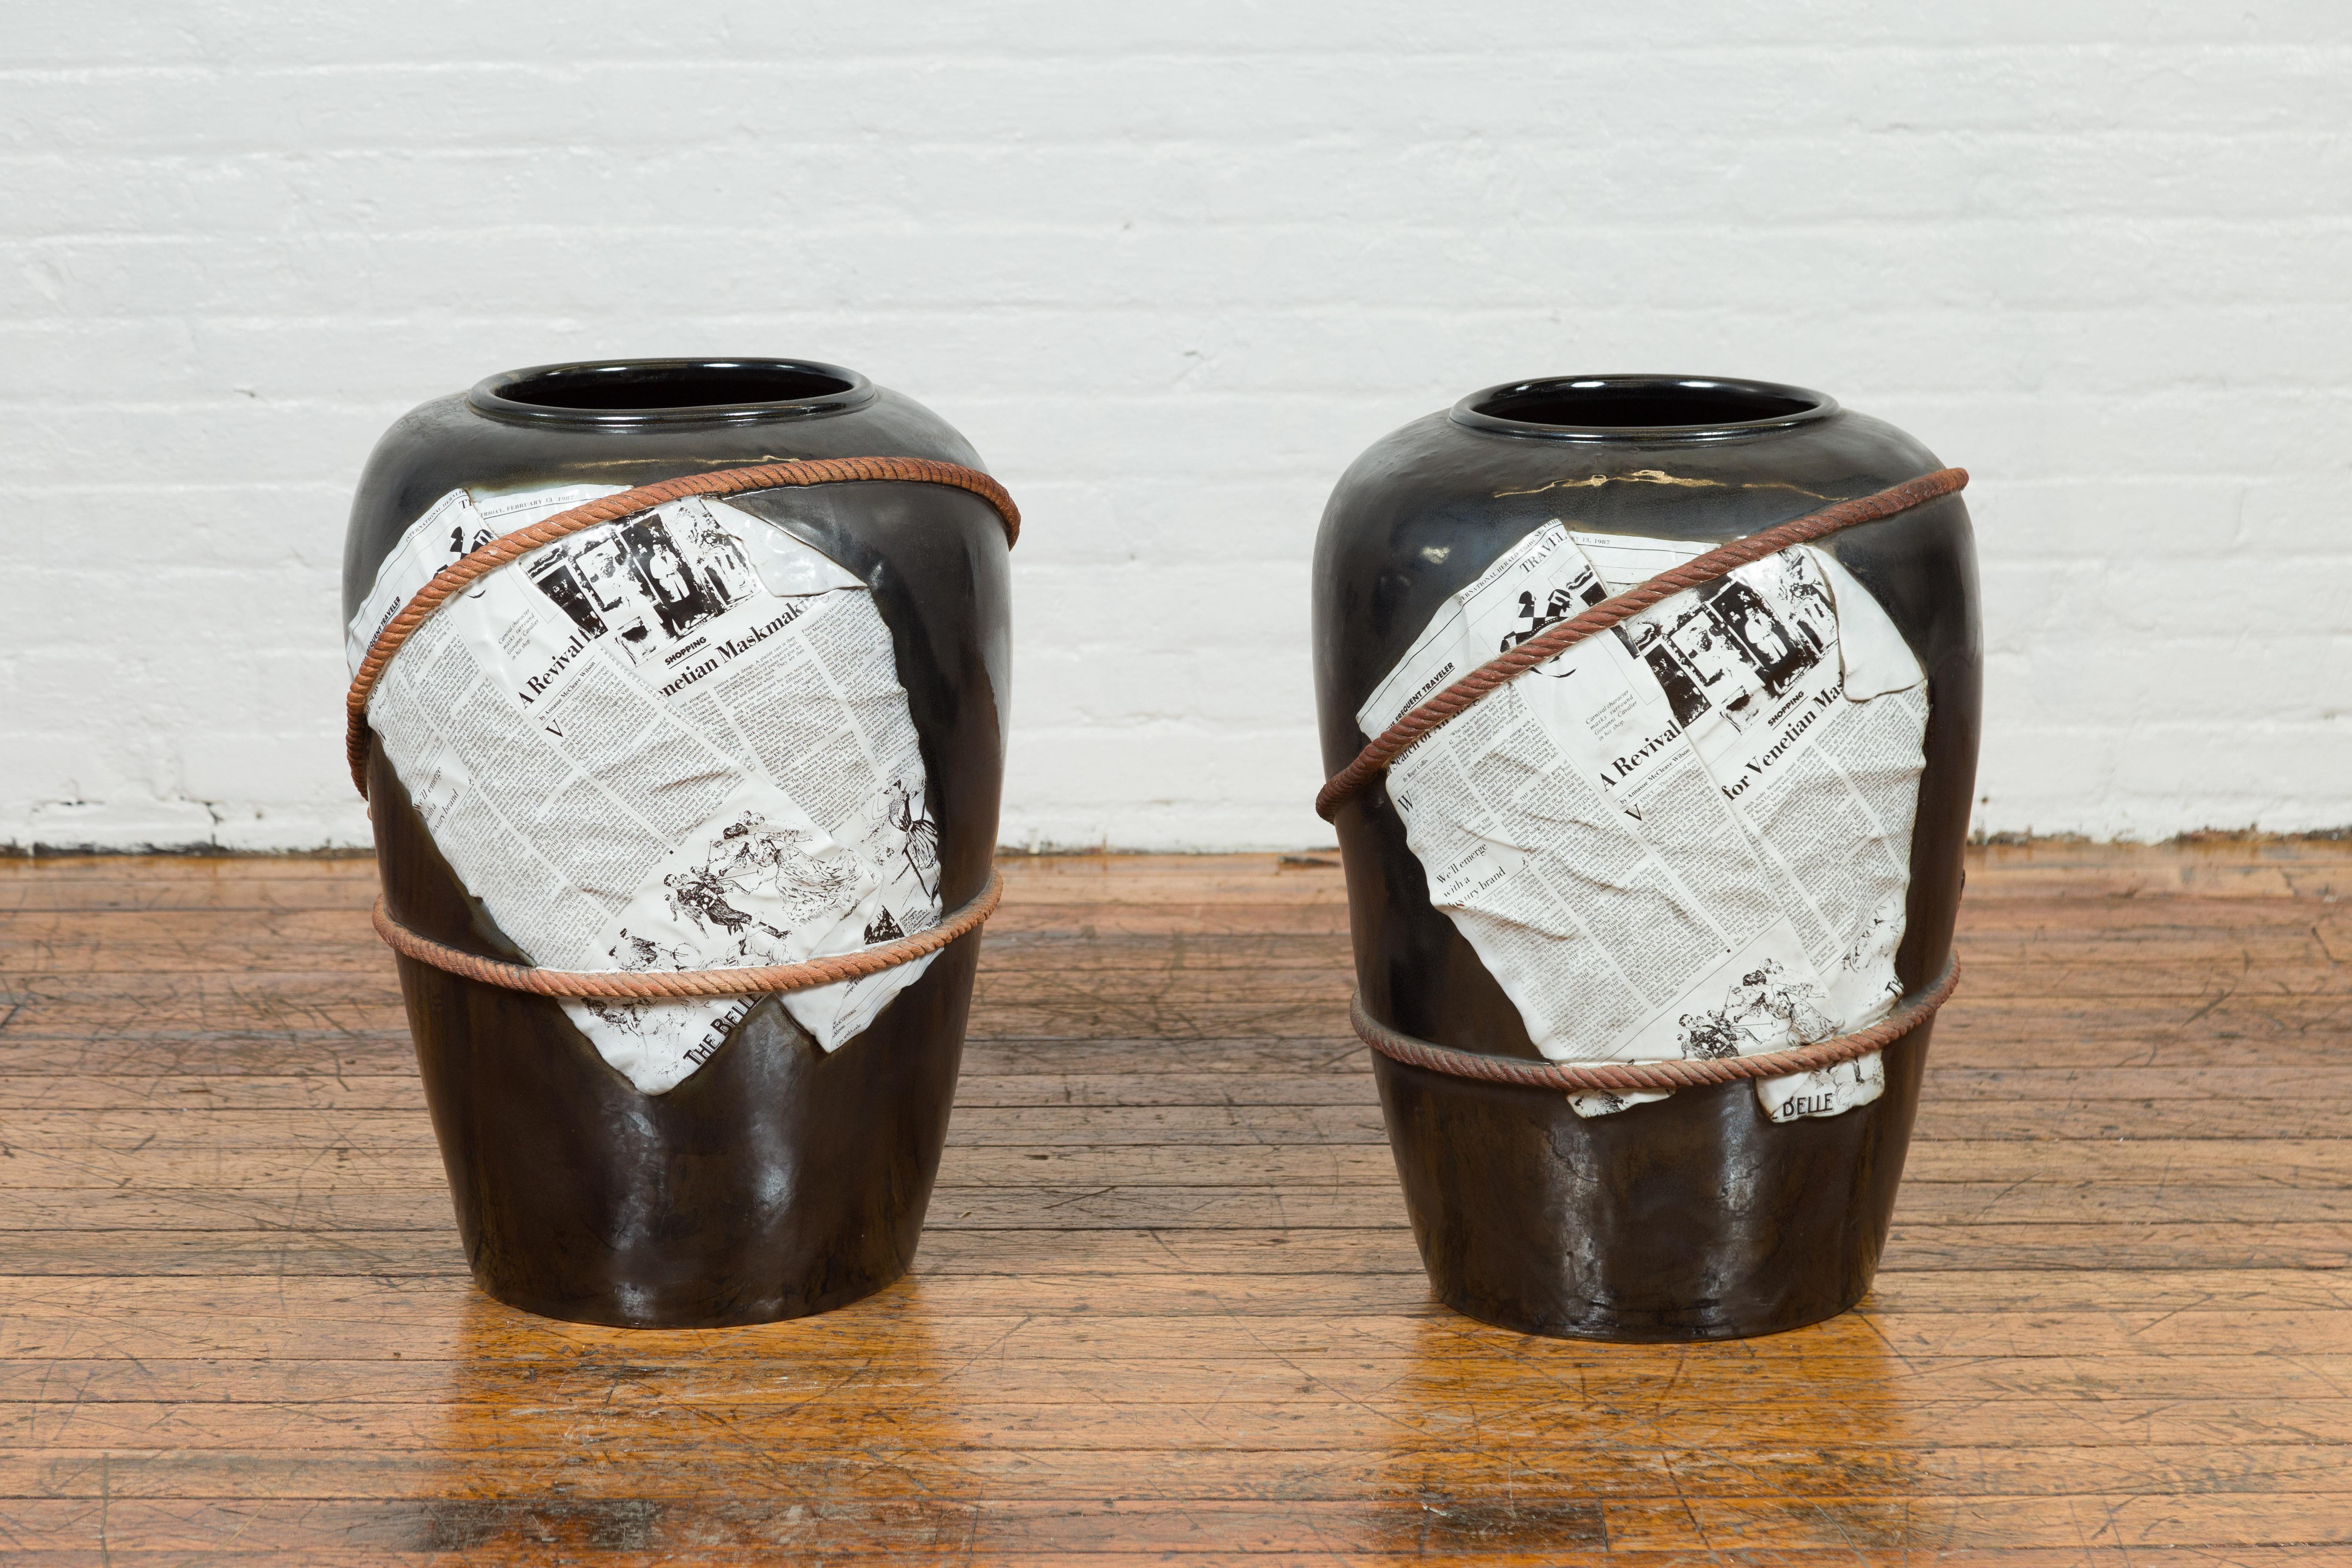 A large contemporary Thai exterior flower vase with black patina, rope and newspaper motifs. We have two available, priced and sold $1,100 each. Created in Thailand, each of these large exterior flower vases attracts our attention with its clean